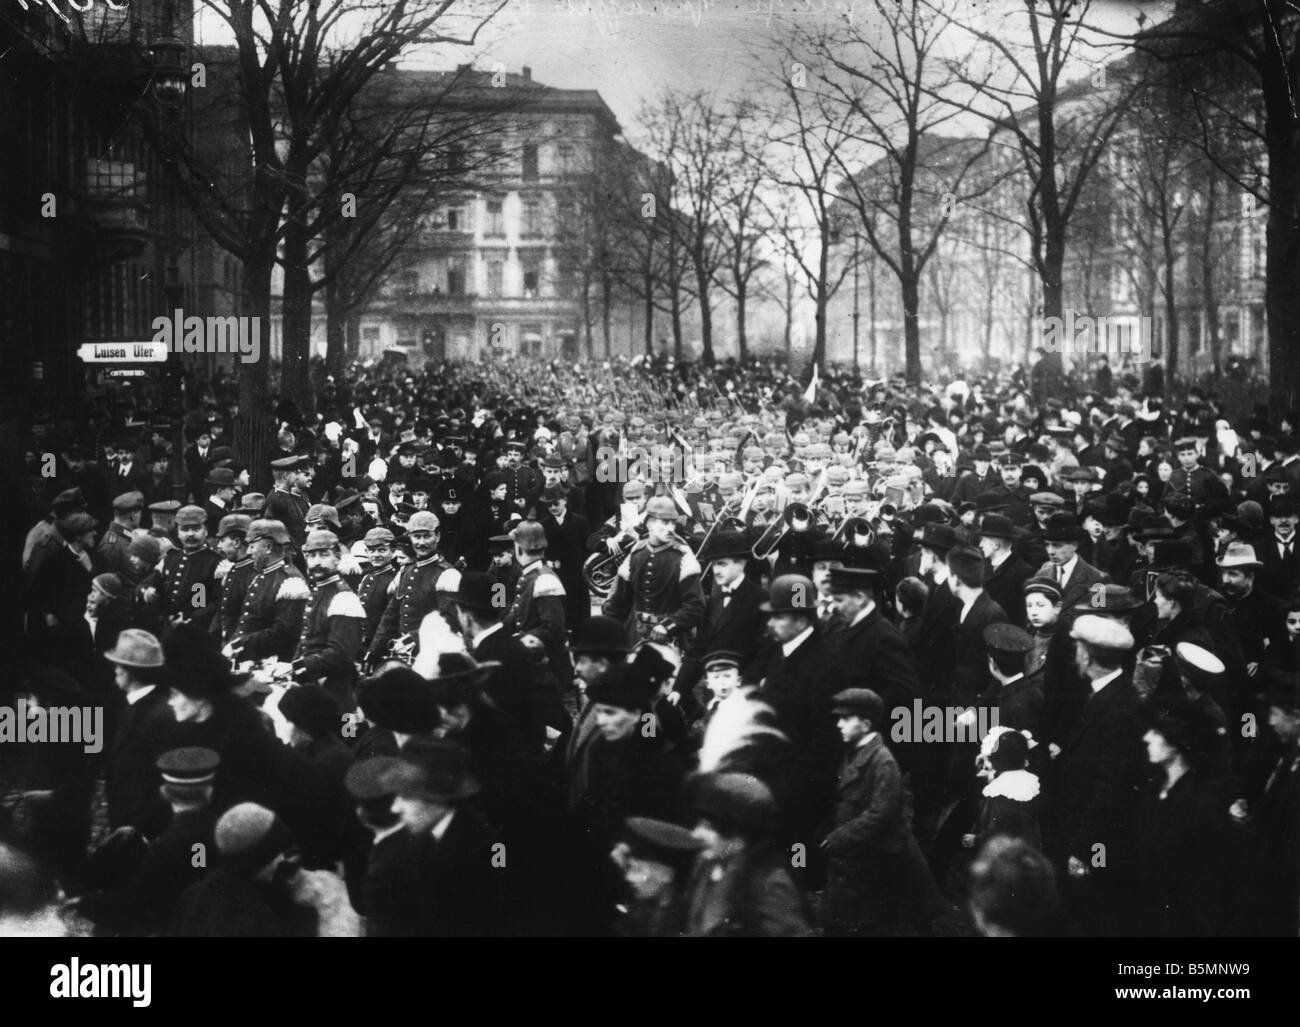 8 1914 8 0 A4 2 Berlin Mobilisation 1914 Photo World War One Mobilisation August 1914 Army volunteers on their way to the statio Stock Photo